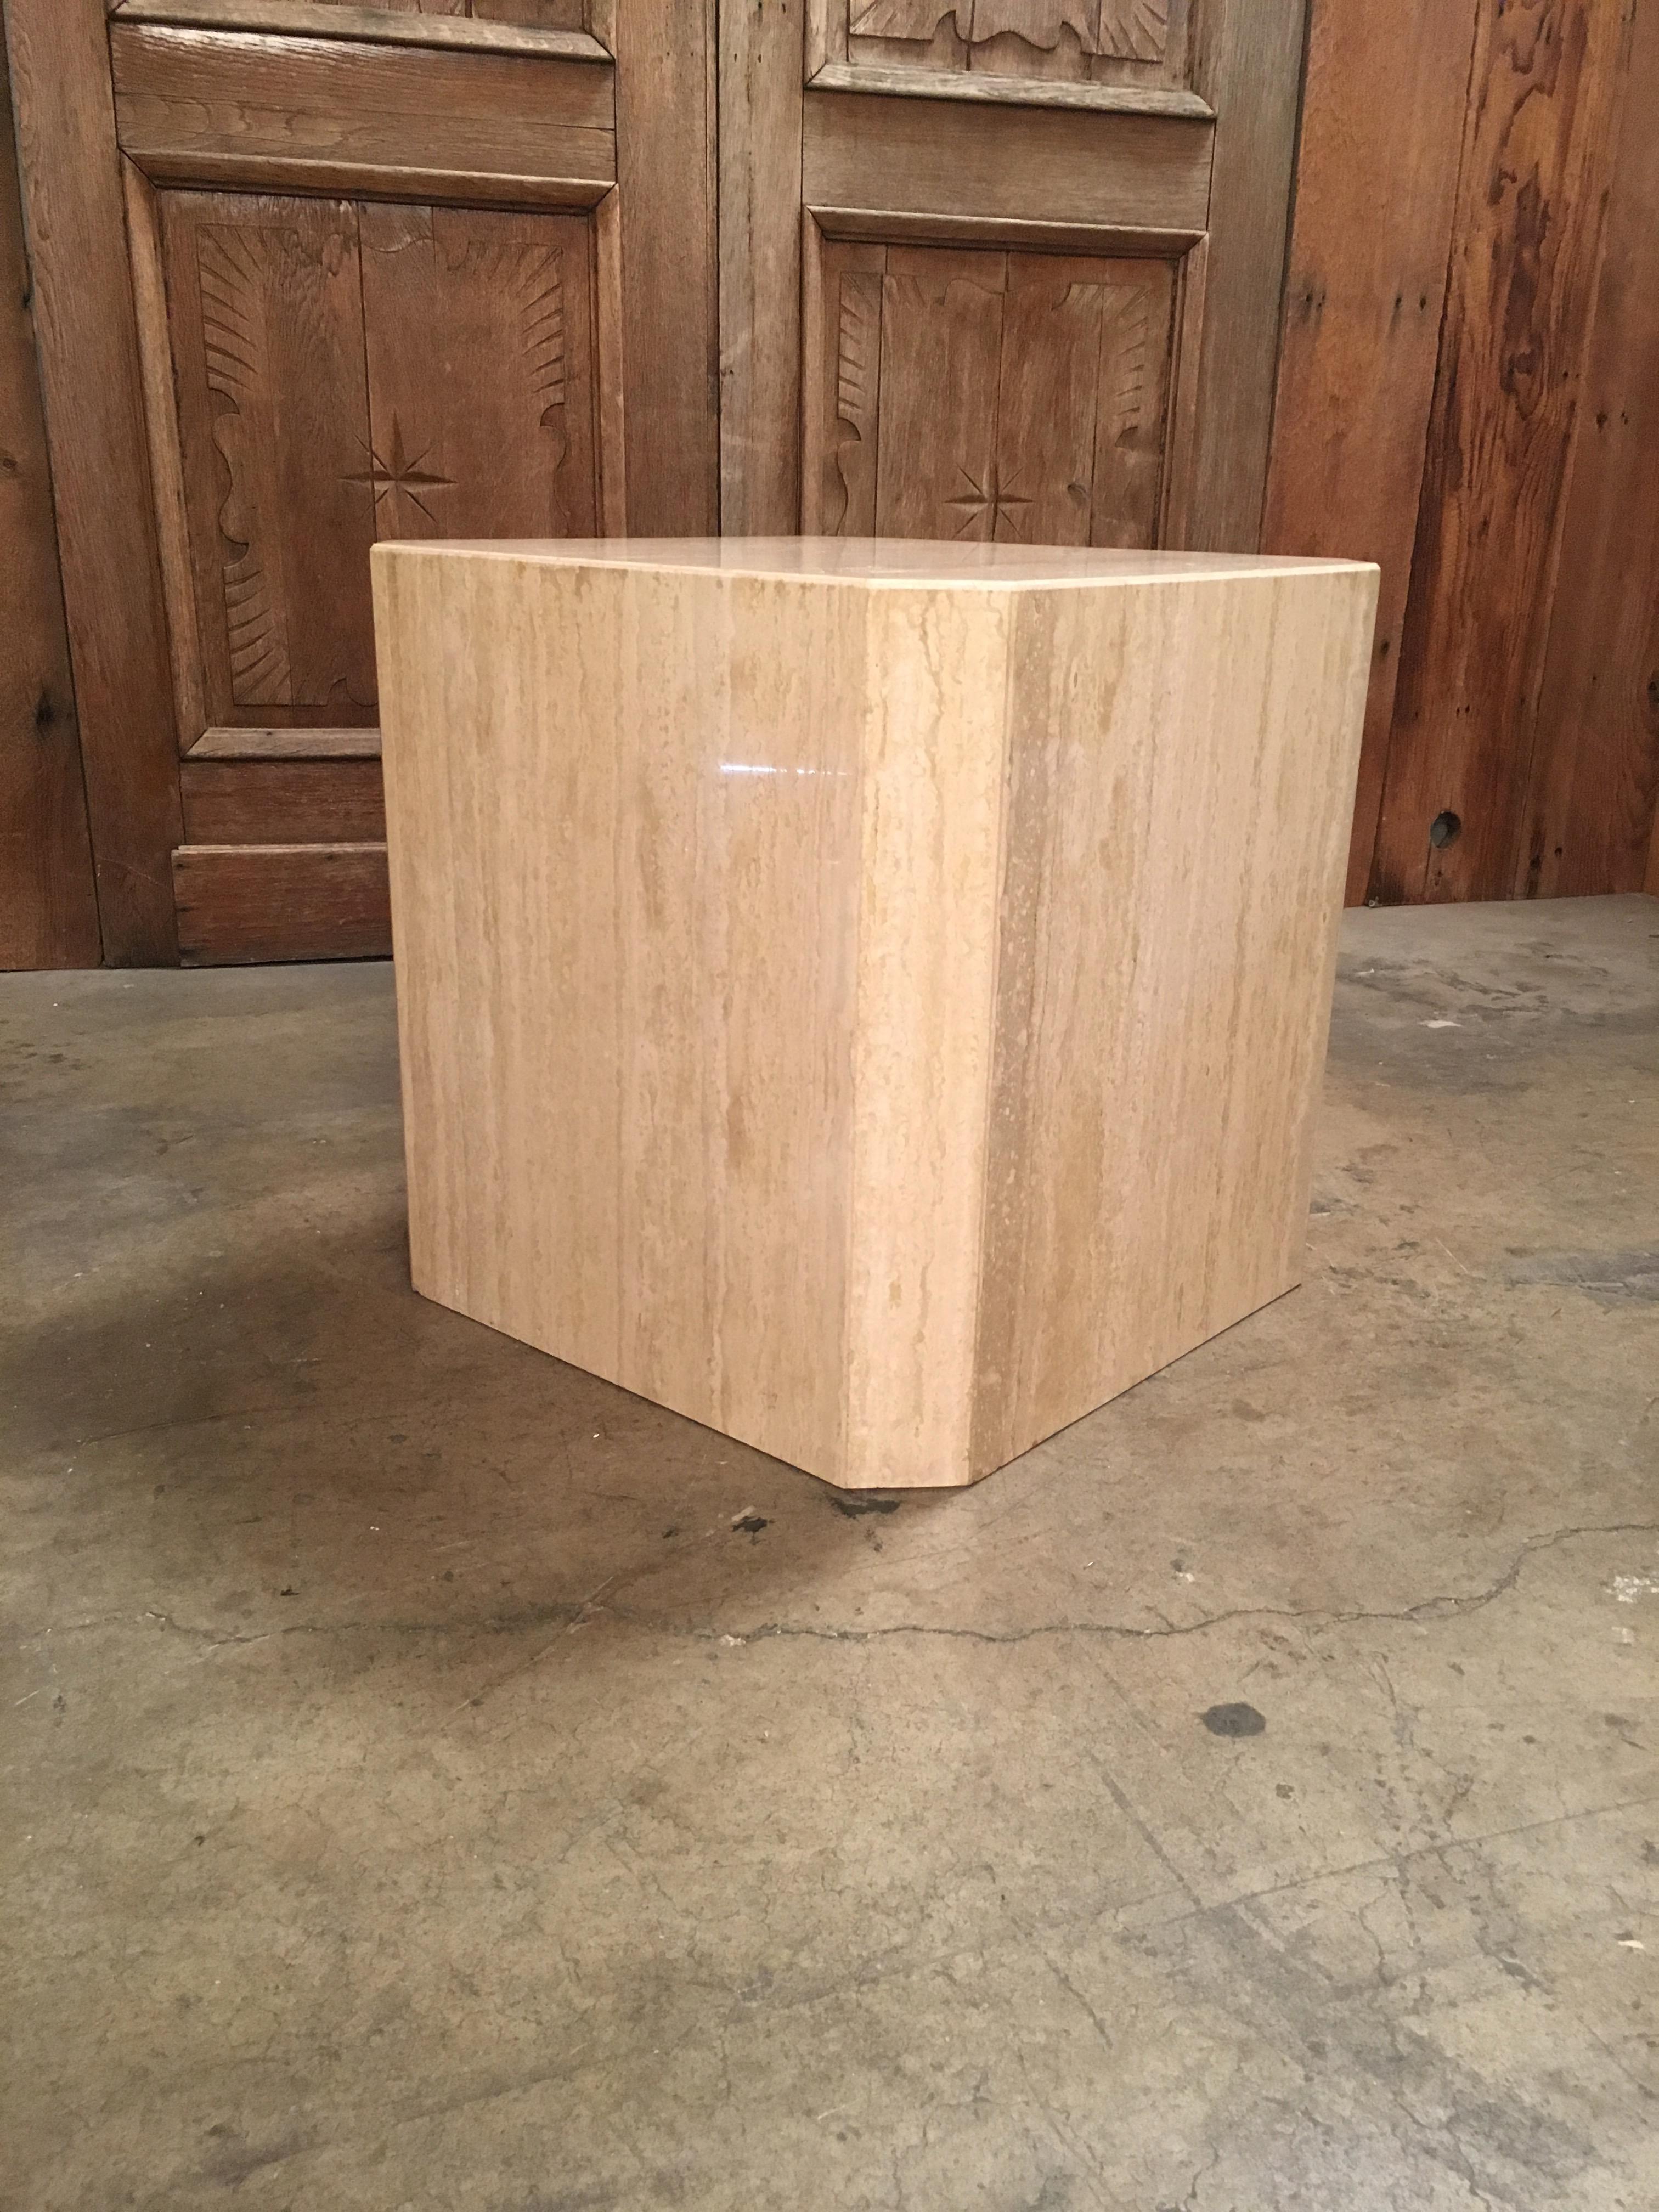 Octagonal cube Travertine marble table or pedestal.